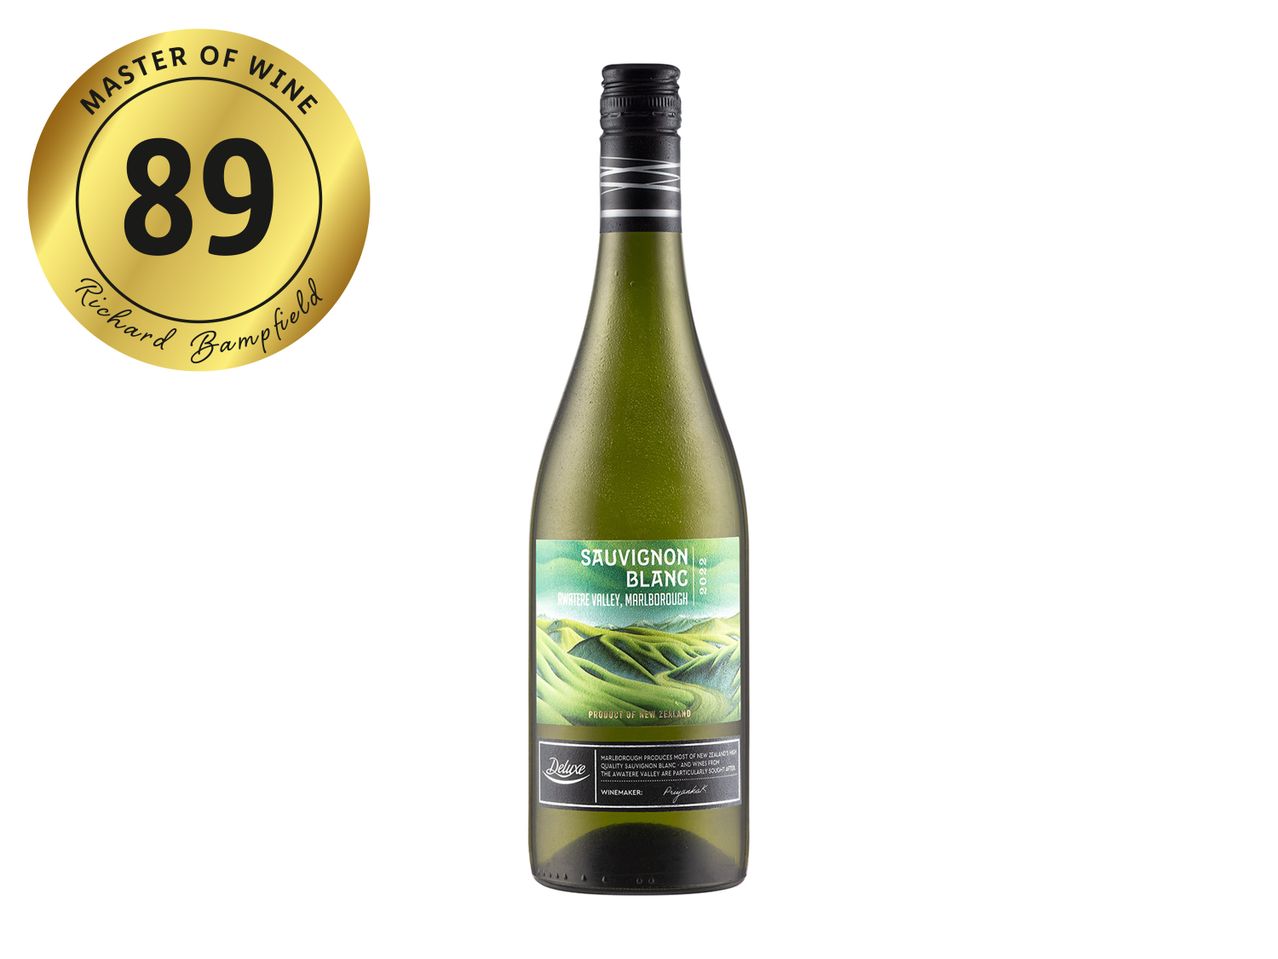 Go to full screen view: Deluxe New Zealand Sauvignon Blanc, Awatere Valley - Image 1